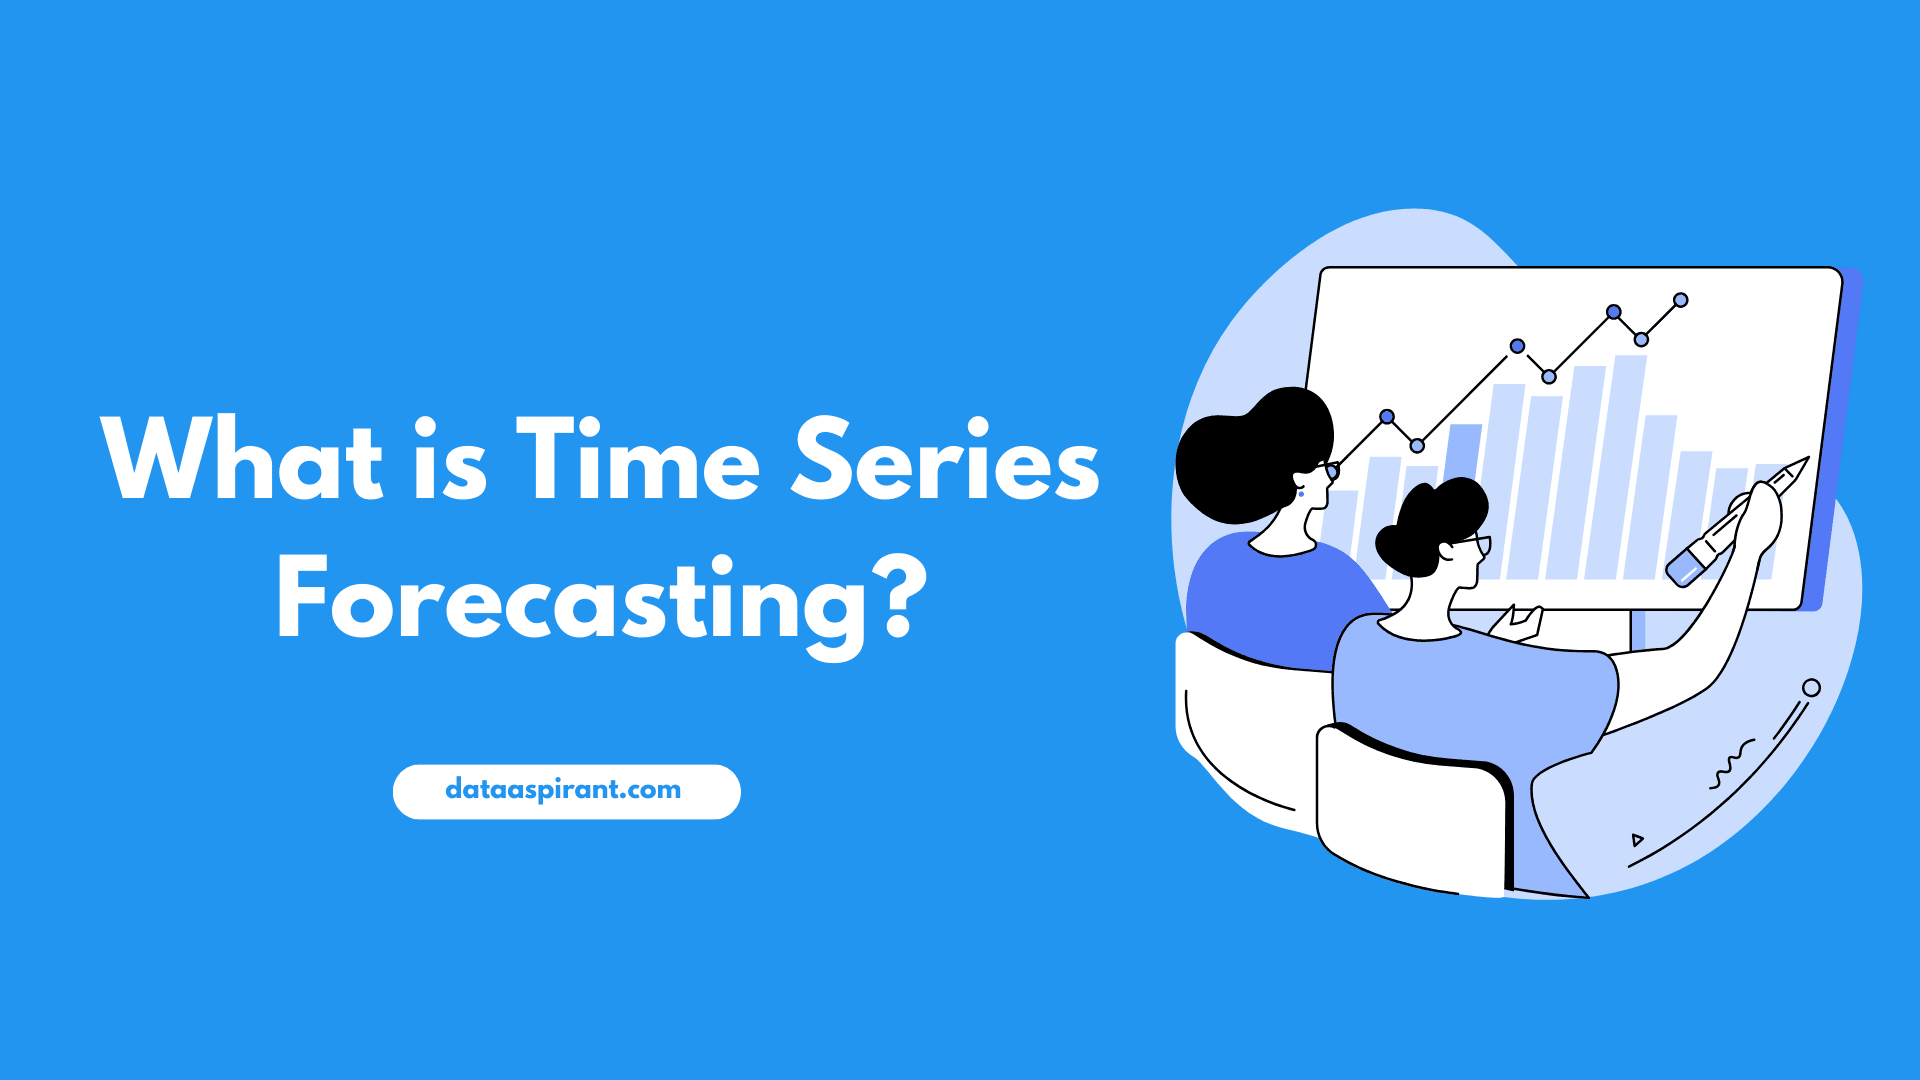 What is Time-Series and Time Series Forecasting?